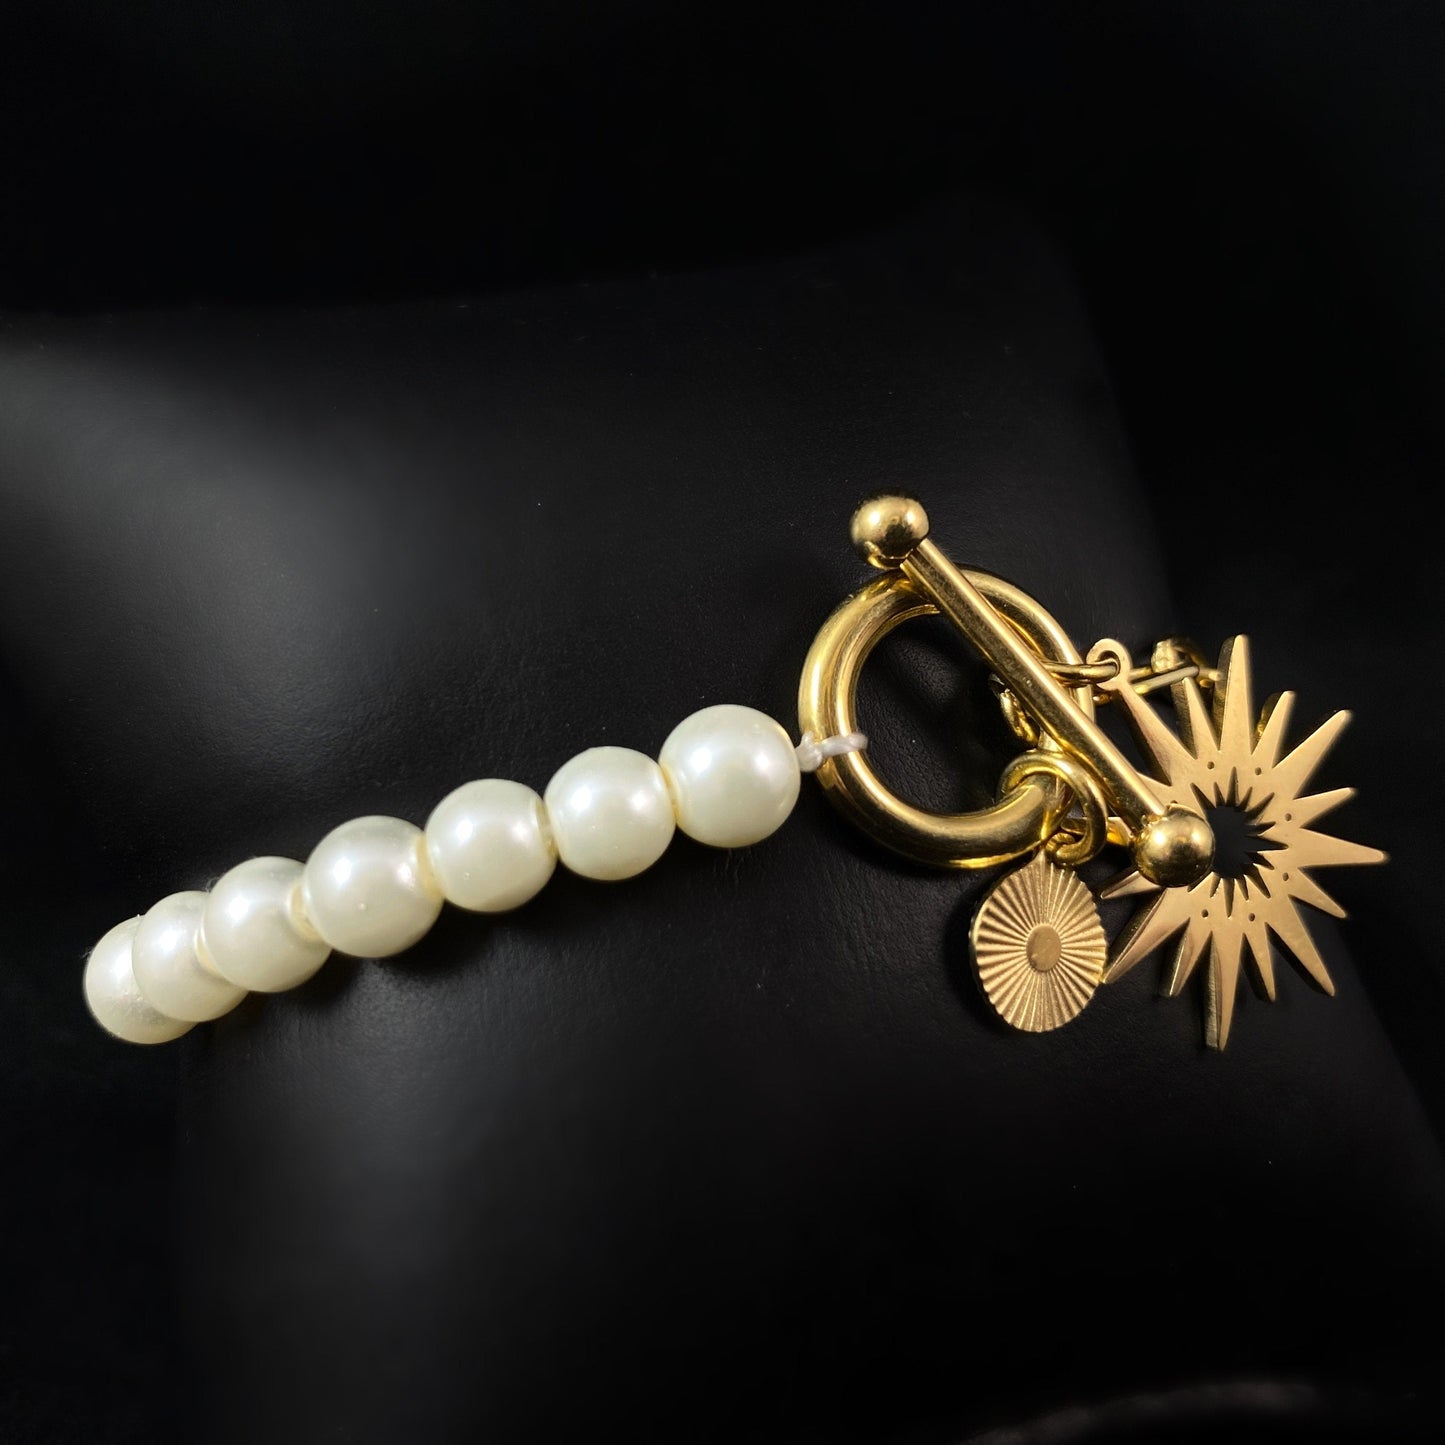 White Pearl Bracelet with Gold Sunburst Accent, a Chunky Gold Chain, and a Decorative Toggle Clasp